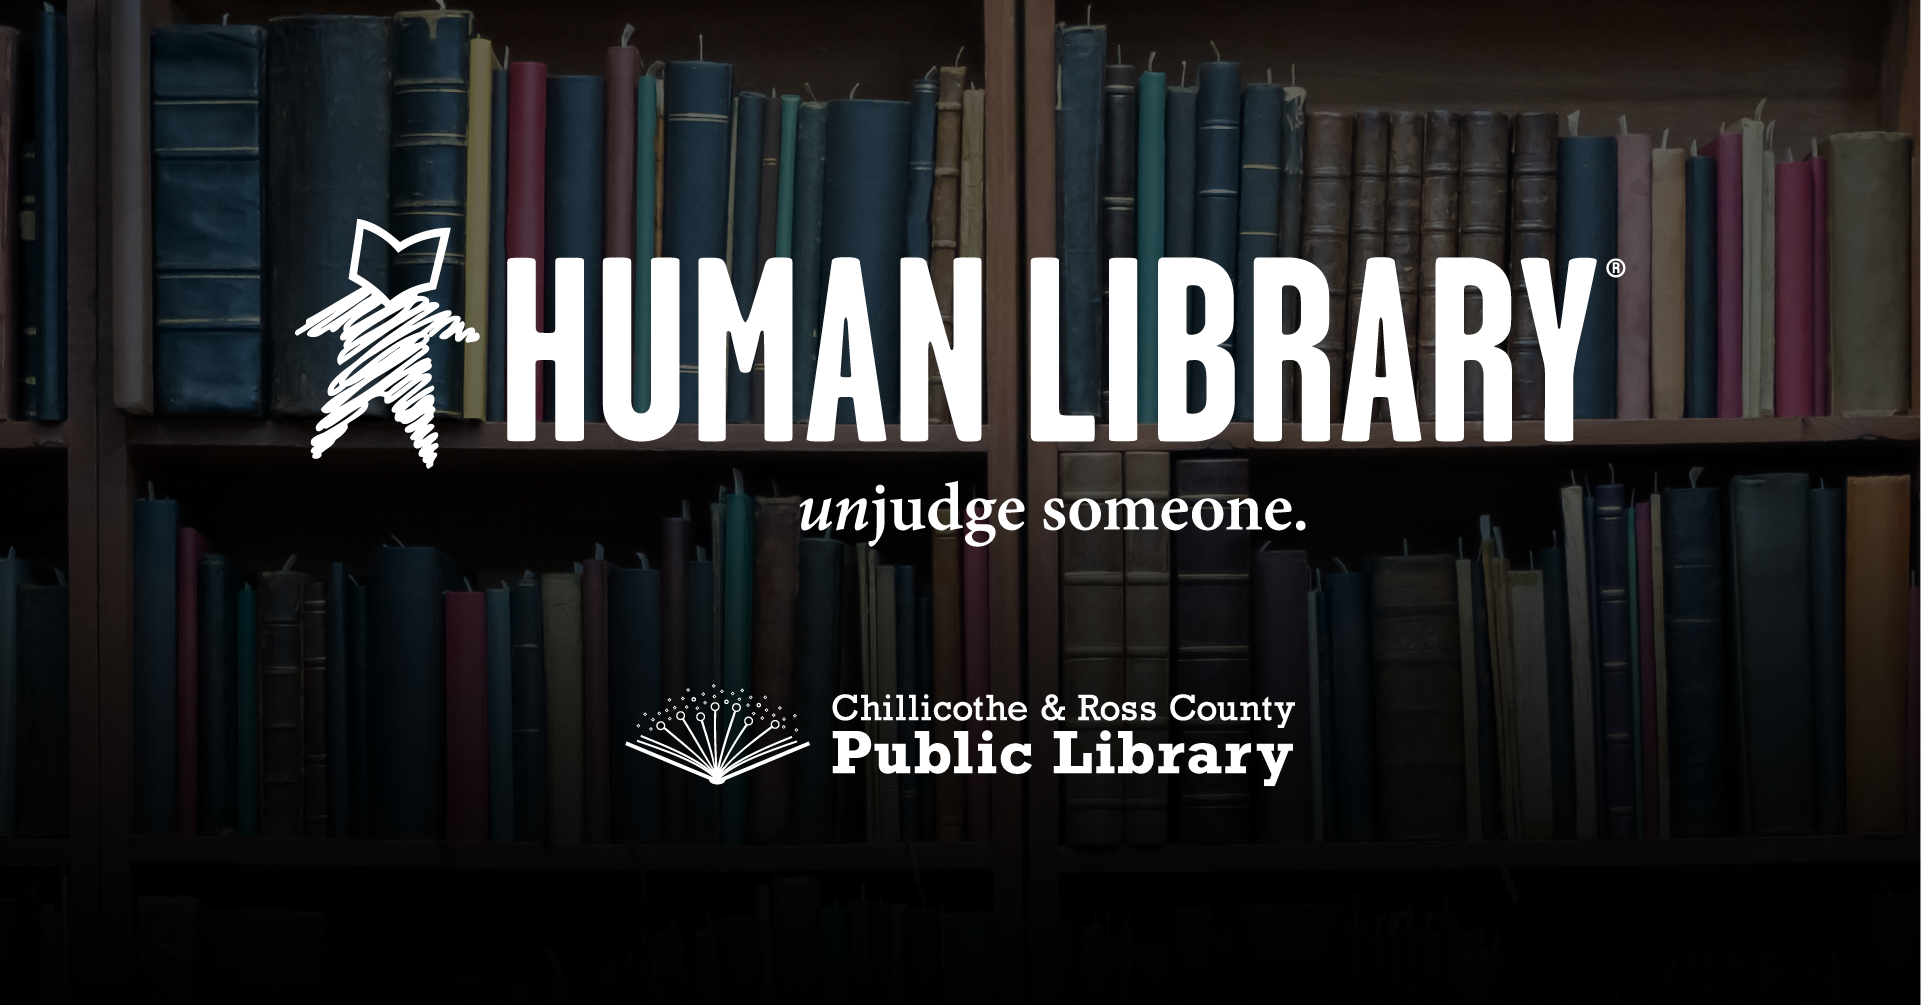 An image reading "the human library: unjudge someone" The text is on a dark overlay over an image of a library of books.